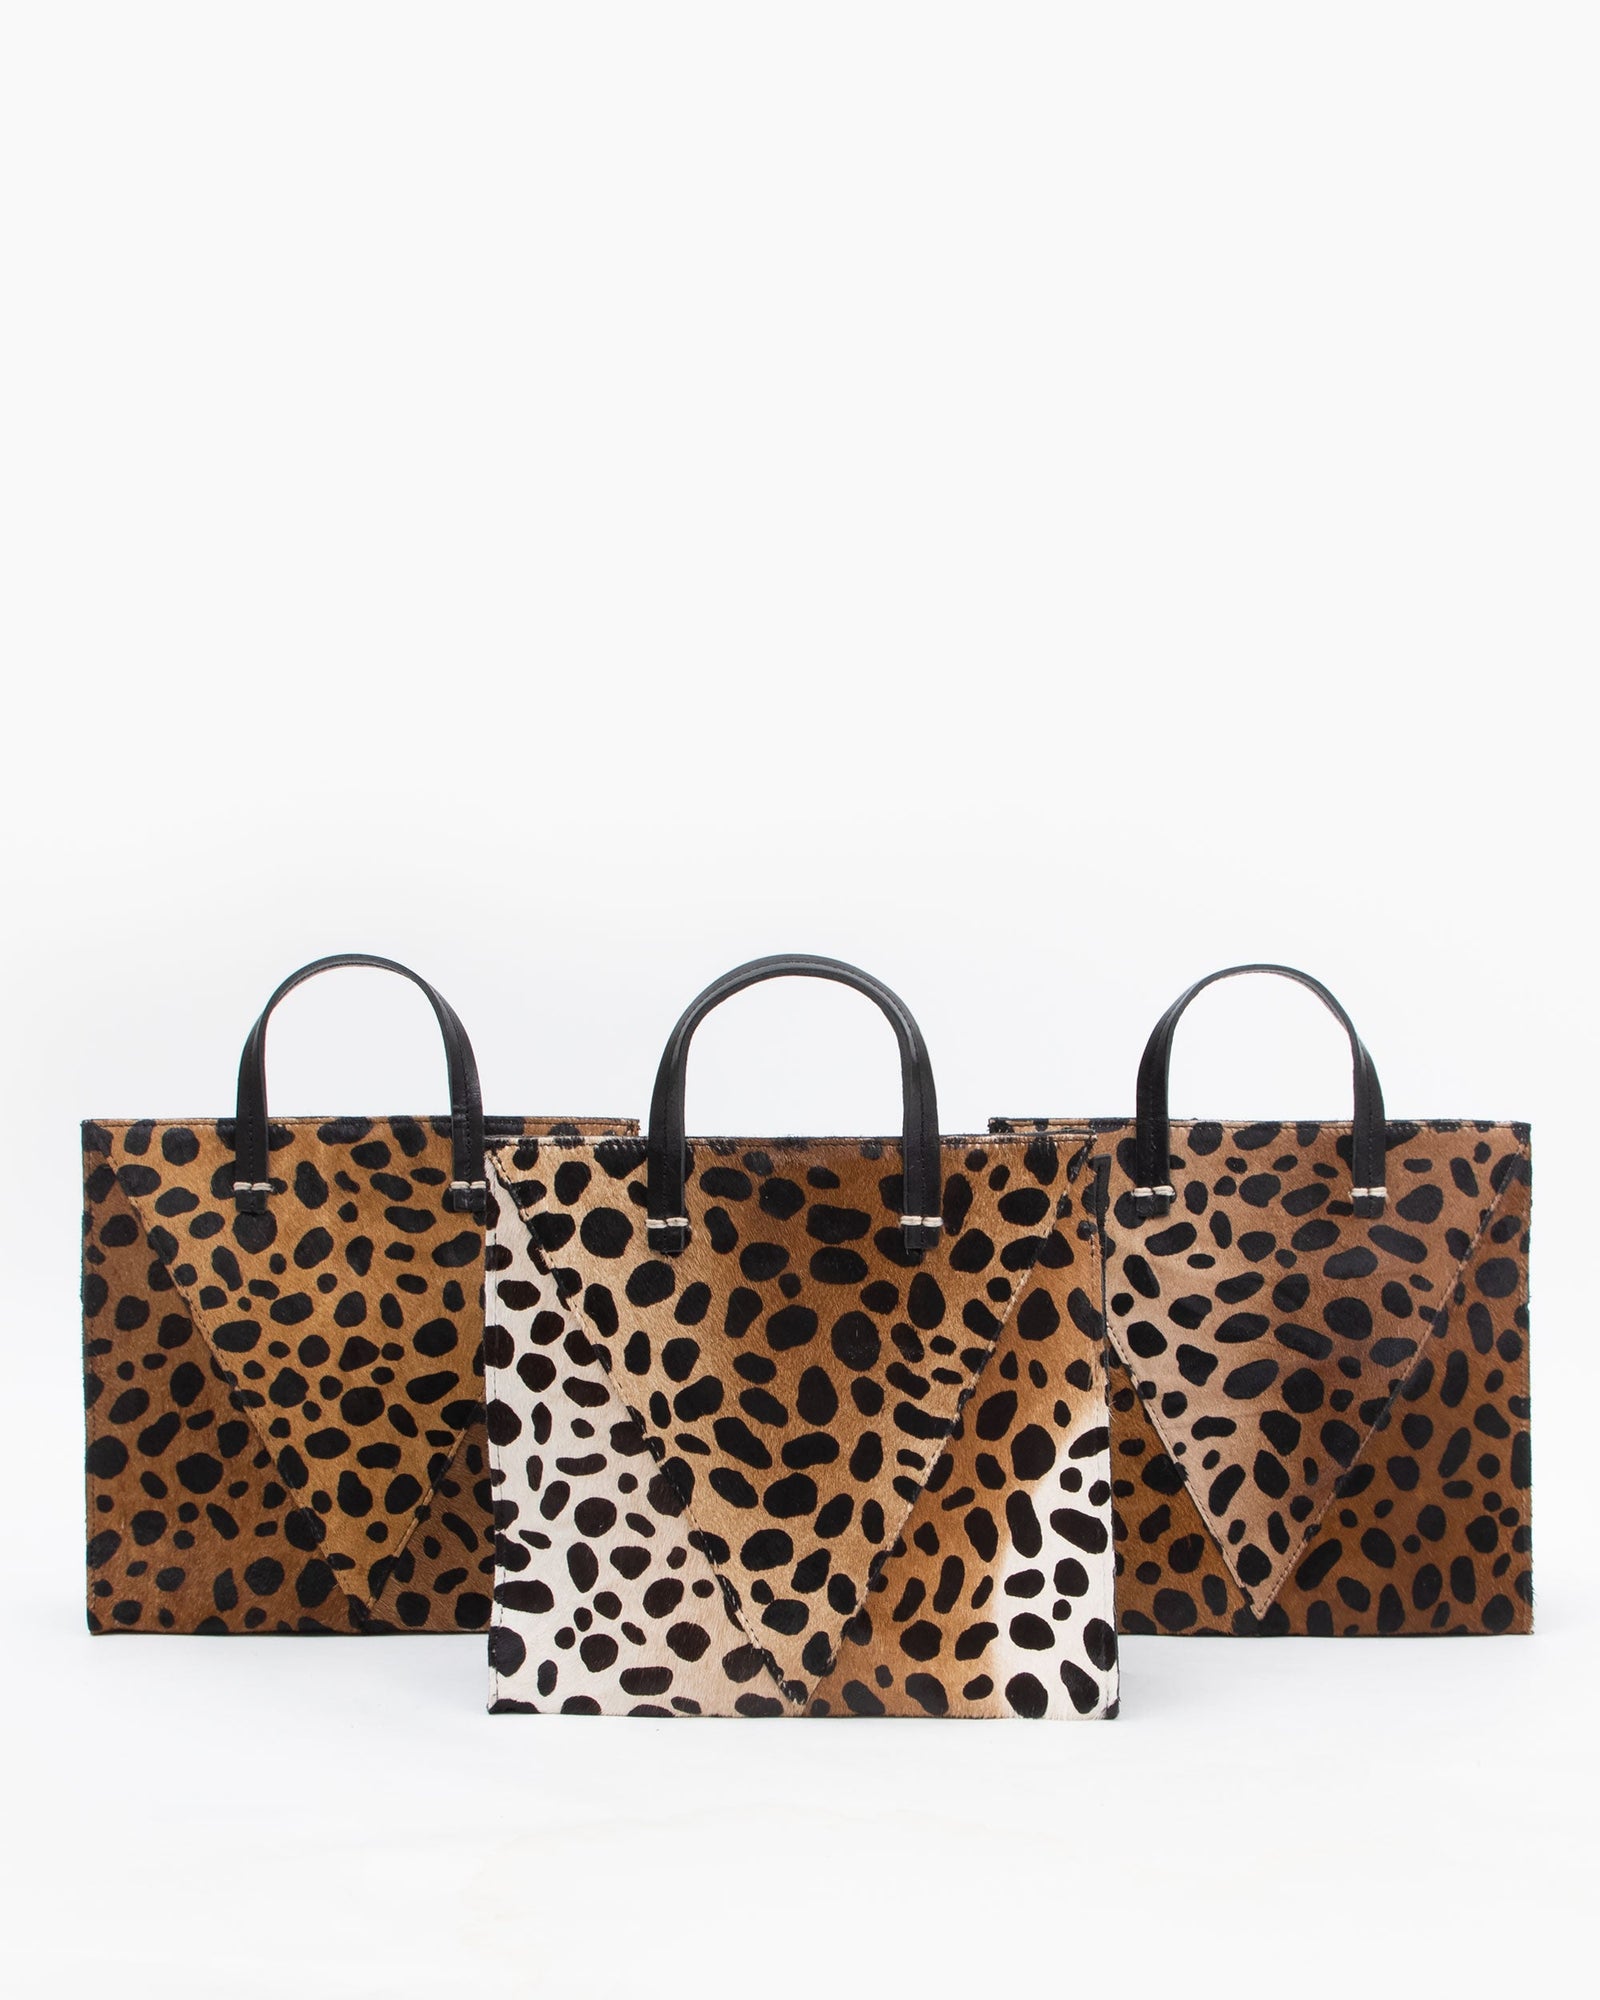 Three Leopard Petit Simple Totes Sitting Next to Each Other